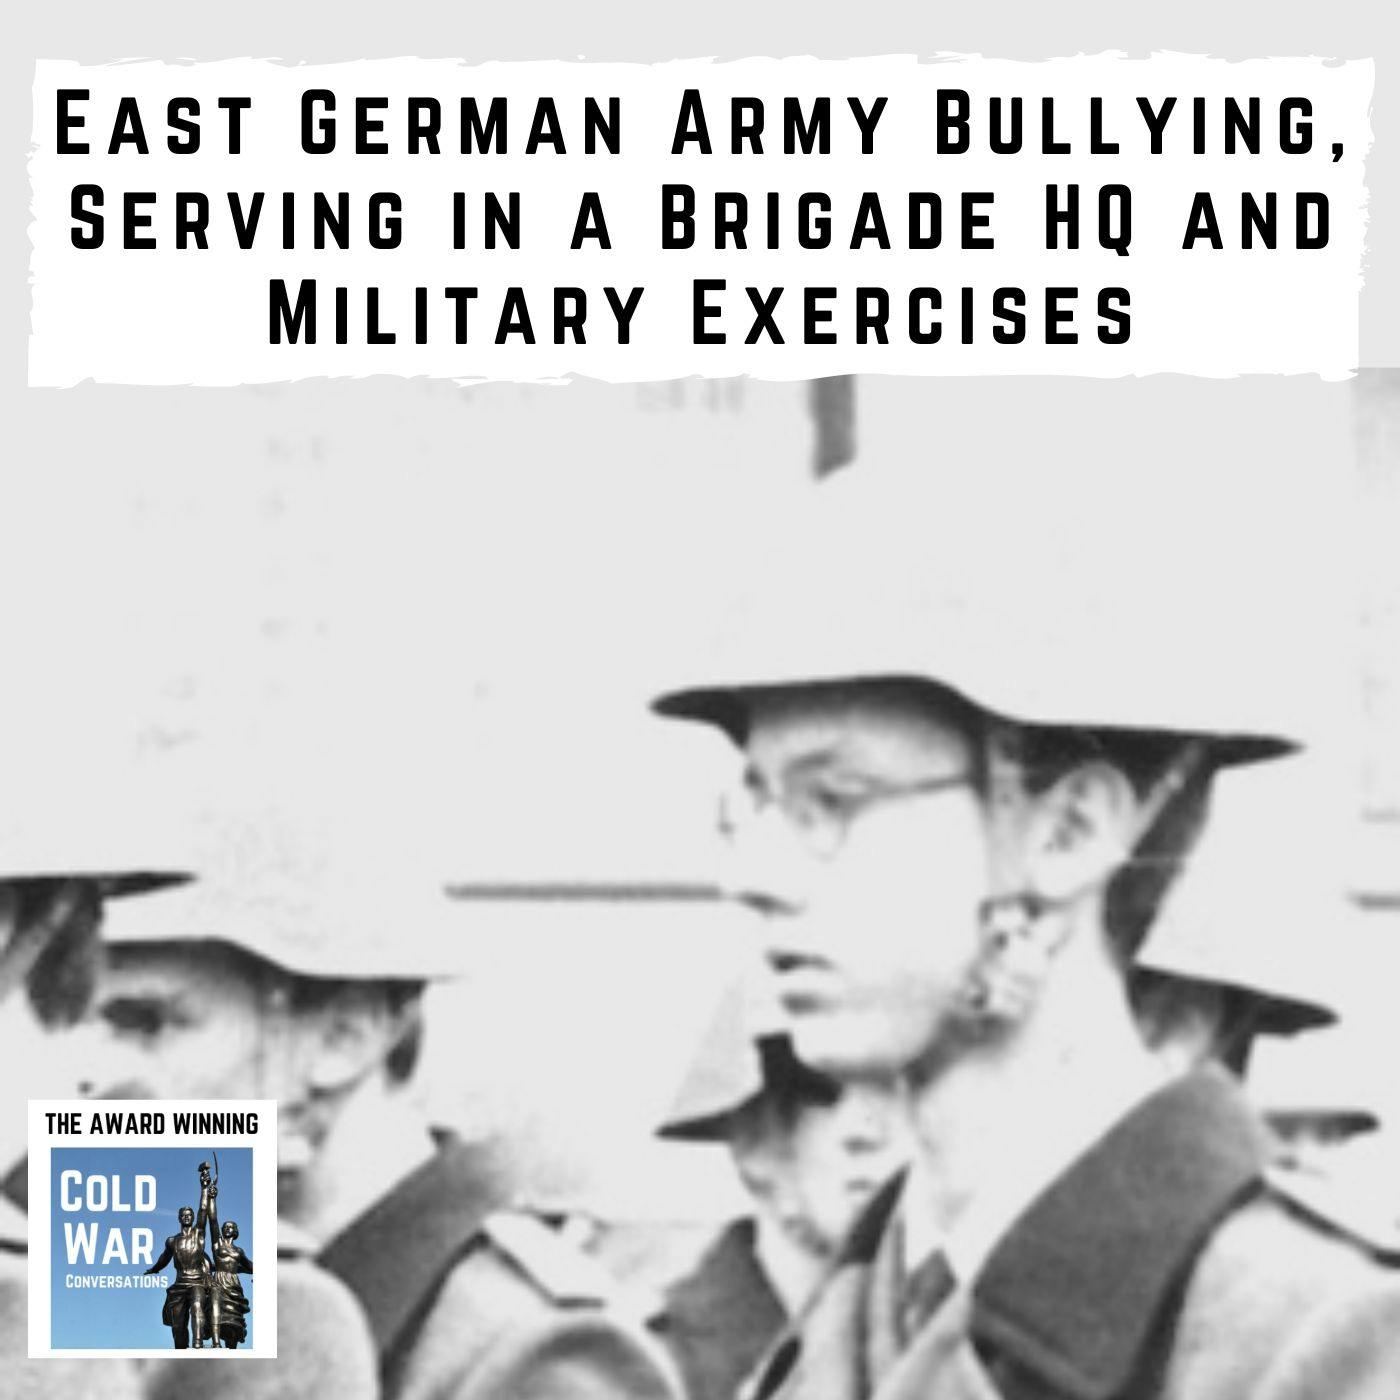 East German Army Bullying, Serving in a Brigade HQ and Military Exercises (346)